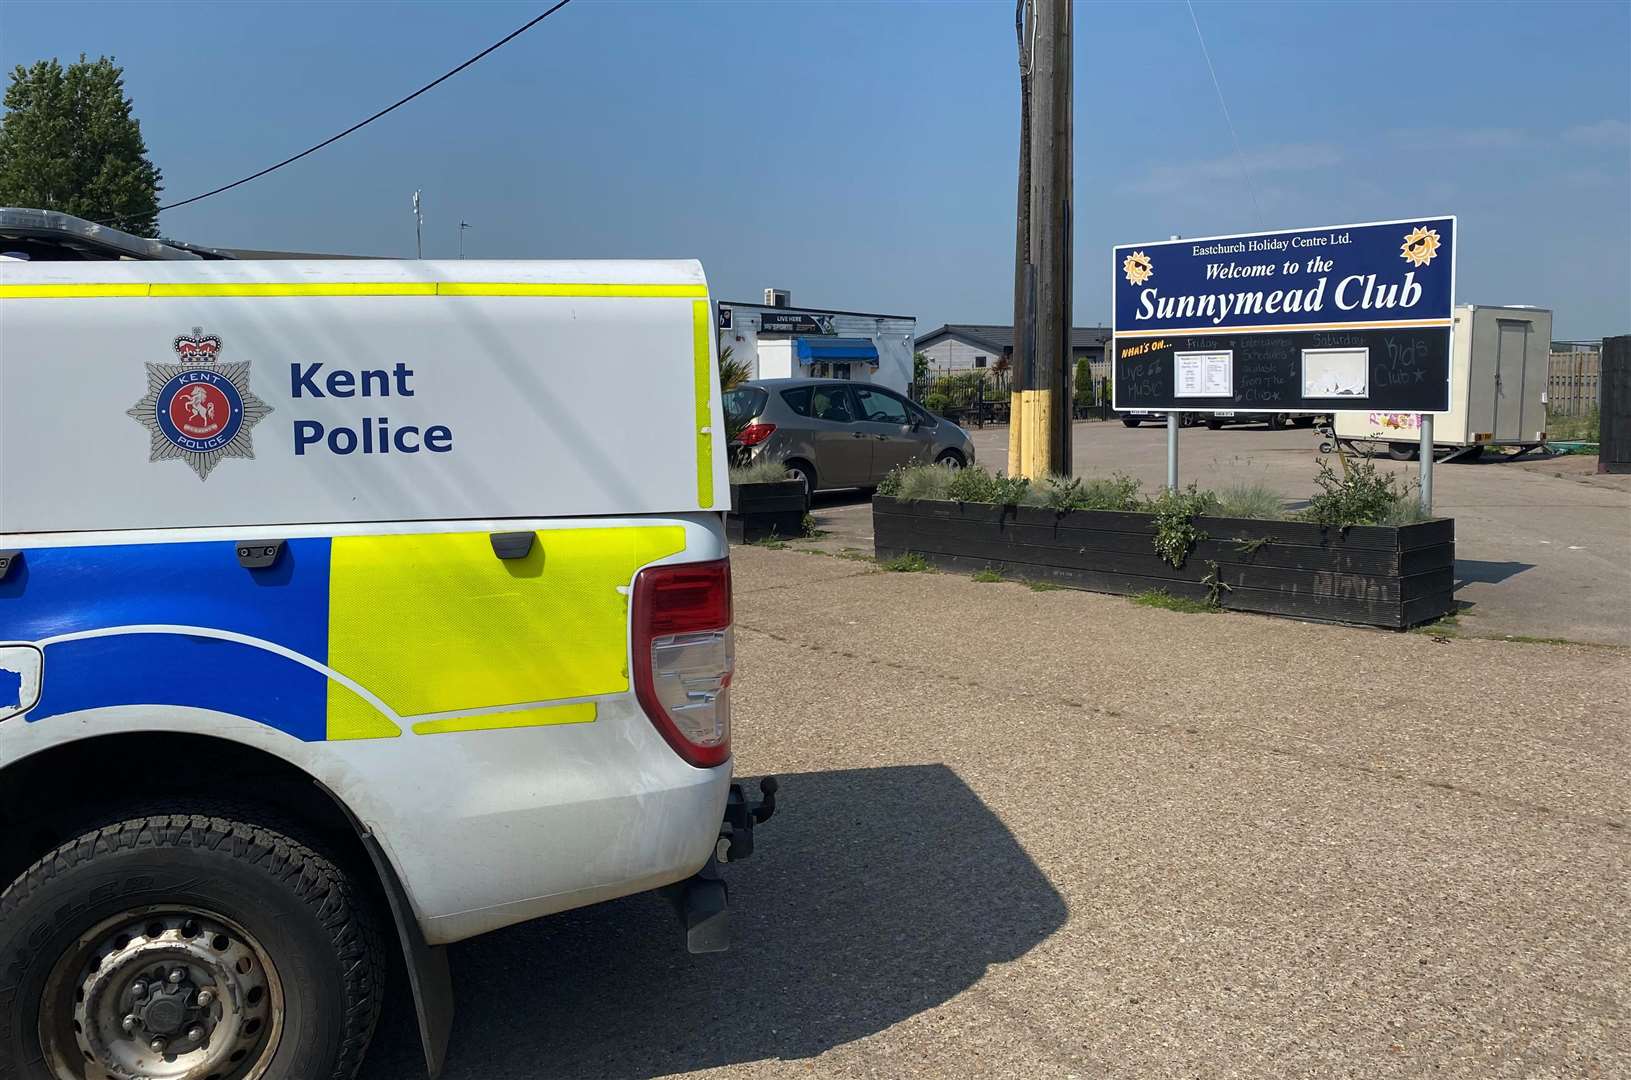 Police were spotted near Eastchurch Holiday Centre in Fourth Avenue, Sheppey, after Mr Petrou was killed